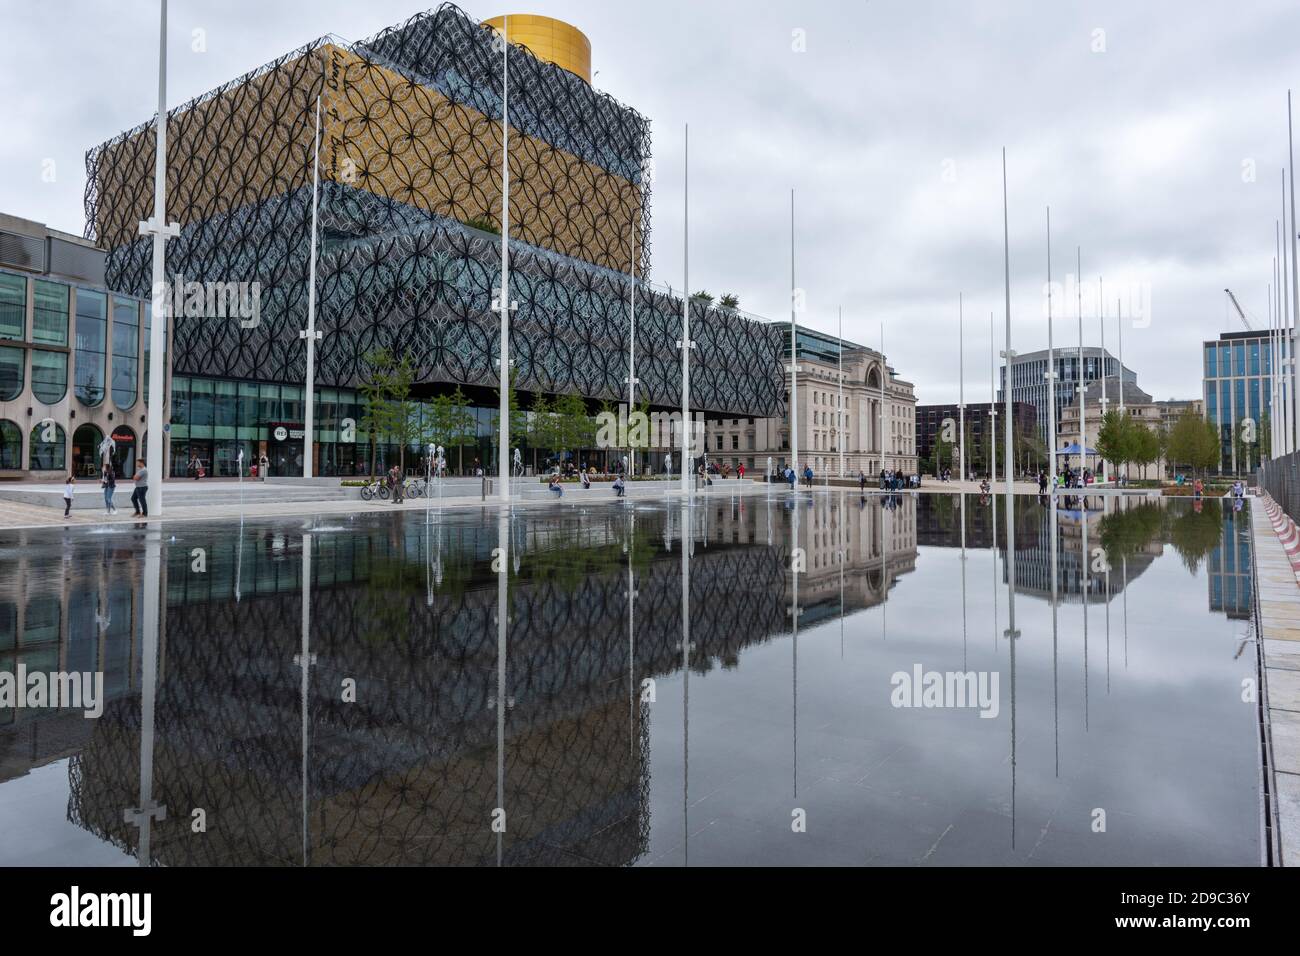 Flagpoles reflected in the water, Centenary Square, Birmingham Stock Photo